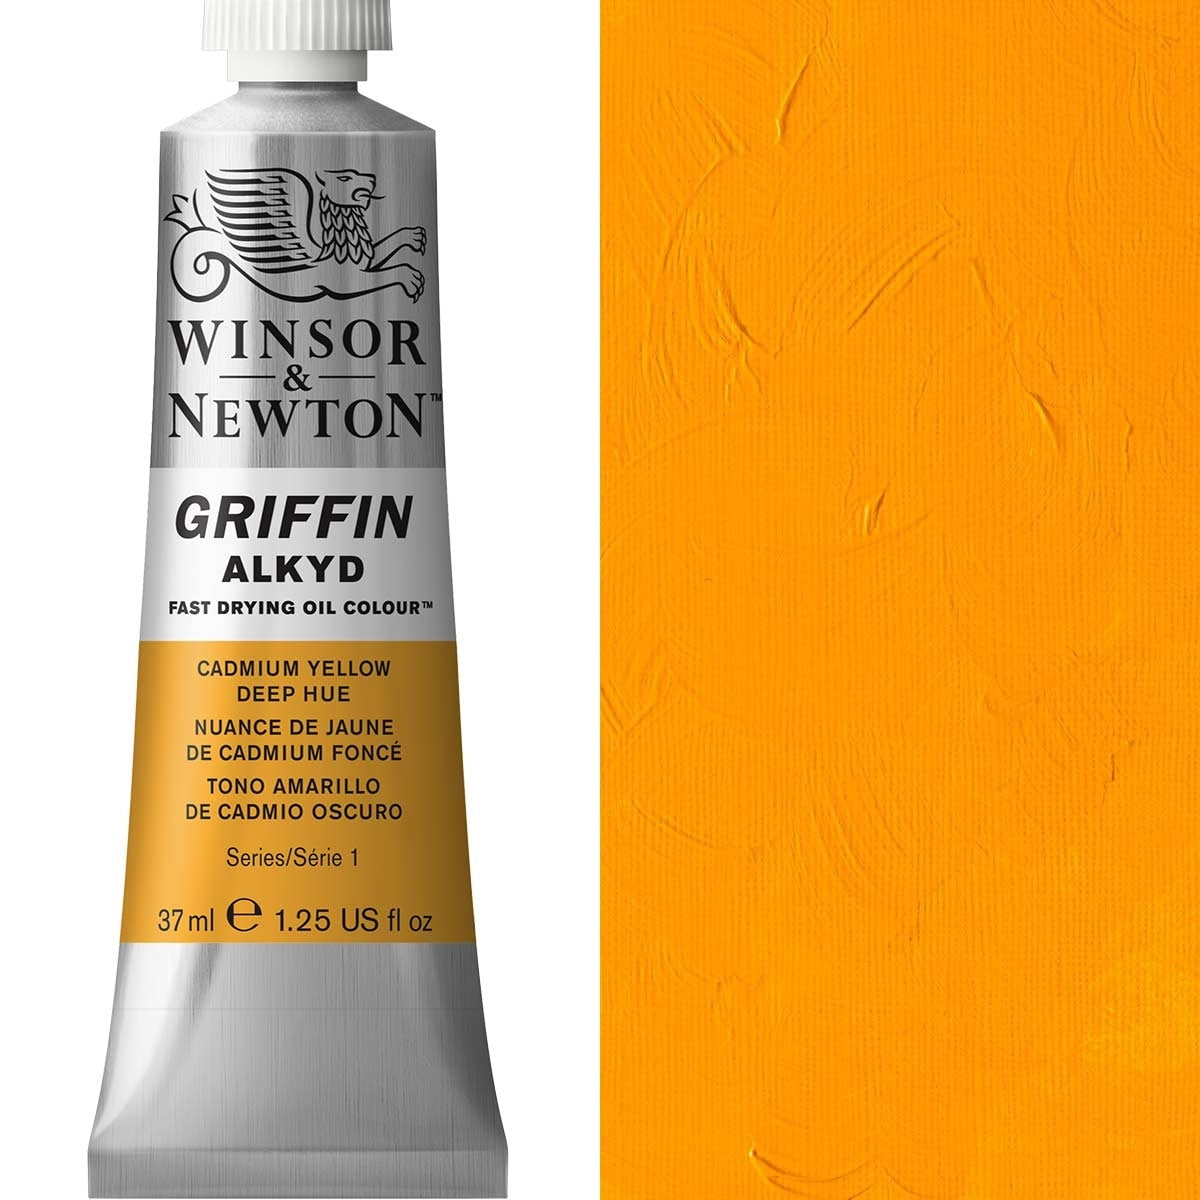 Winsor and Newton - Griffin ALKYD Oil Colour - 37ml - Cadmium Yellow Deep Hue